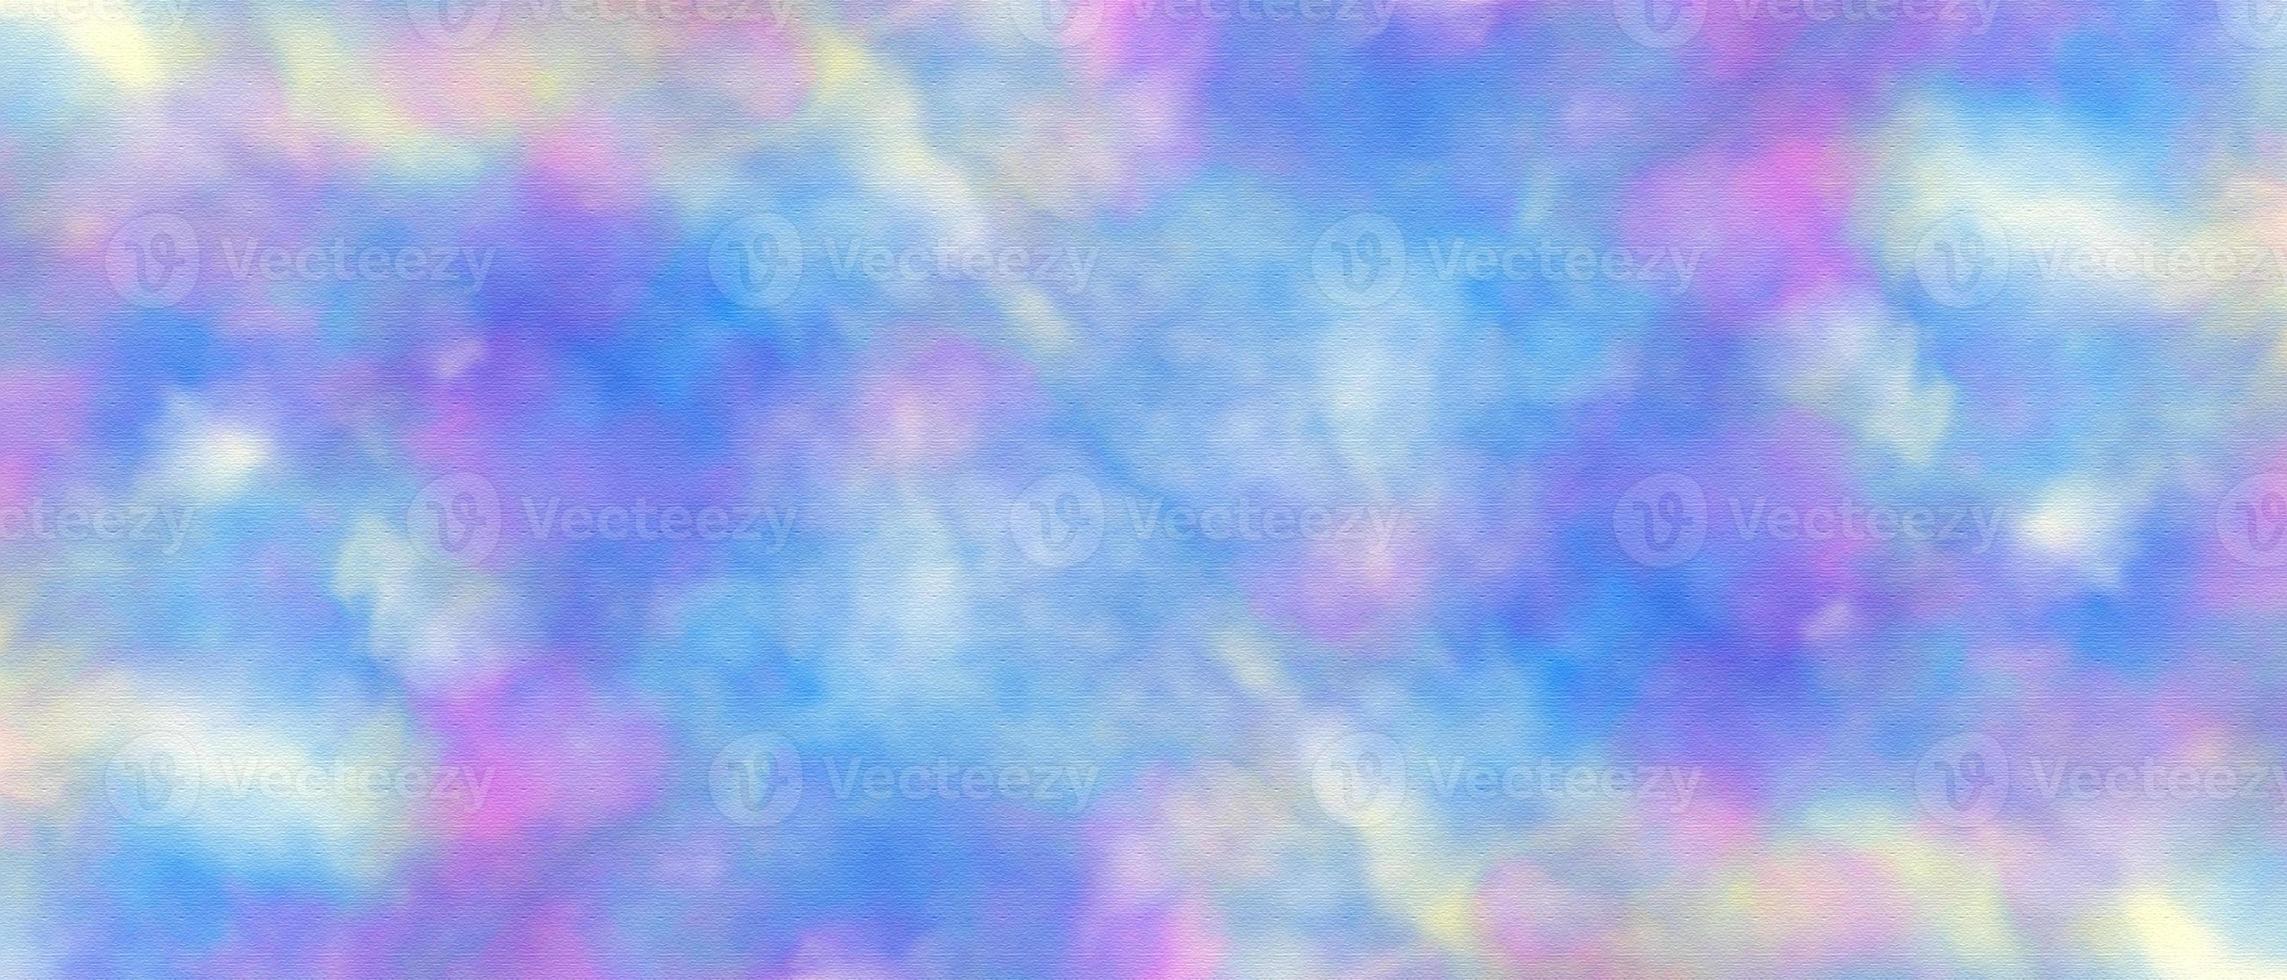 Artistic hand painted multi layered dark blue background. dark blue nebula sparkle purple star universe in outer space horizontal galaxy on space. navy blue watercolor and paper texture. wash aqua photo